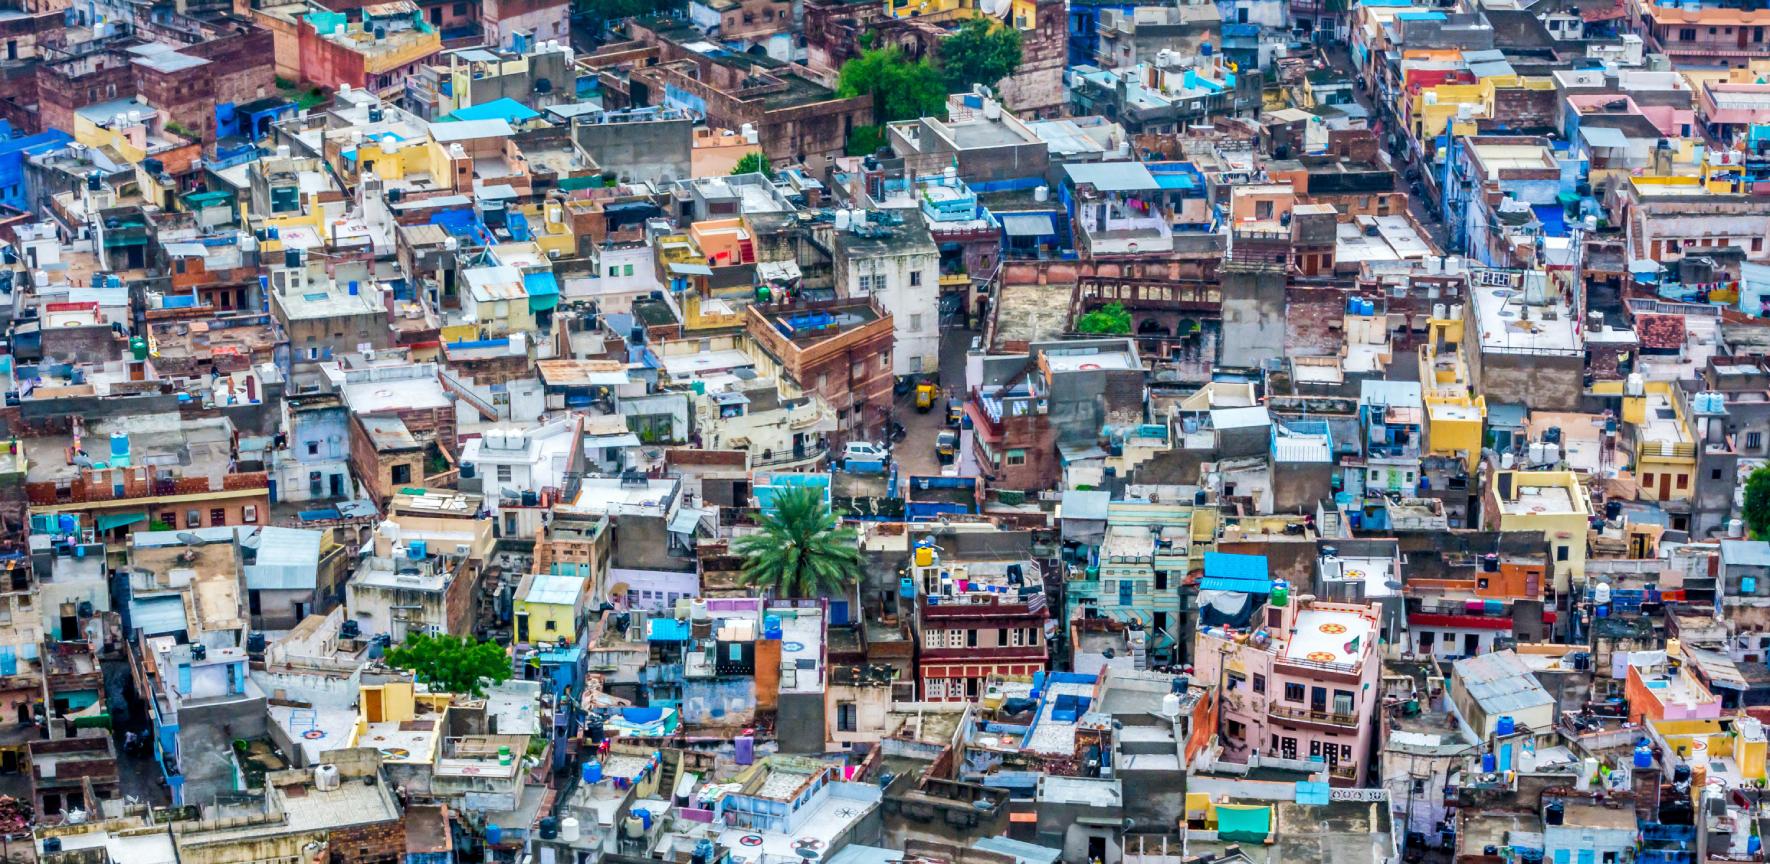 Rooftops of houses in Jodhpur, India